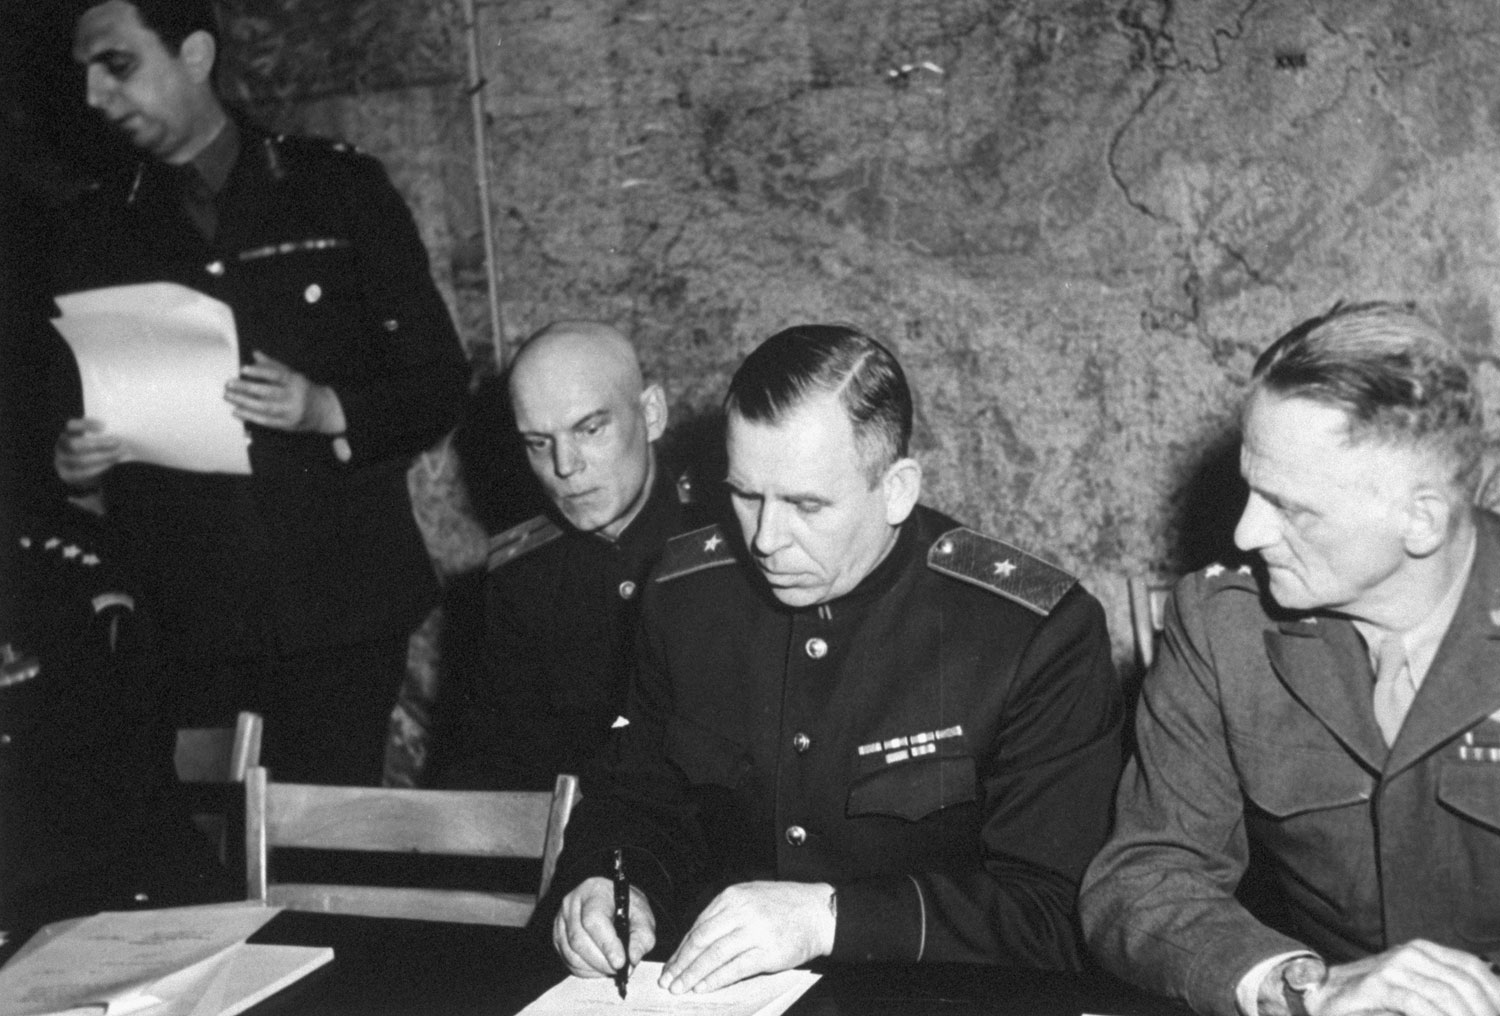 For Red high command, Major General Ivan Susloparov signs, to be followed by French General Francois Sevez for [Alphonse] Juin, commander of French expeditionary forces. At right, [American Gen. Carl Andrew] Spaatz.